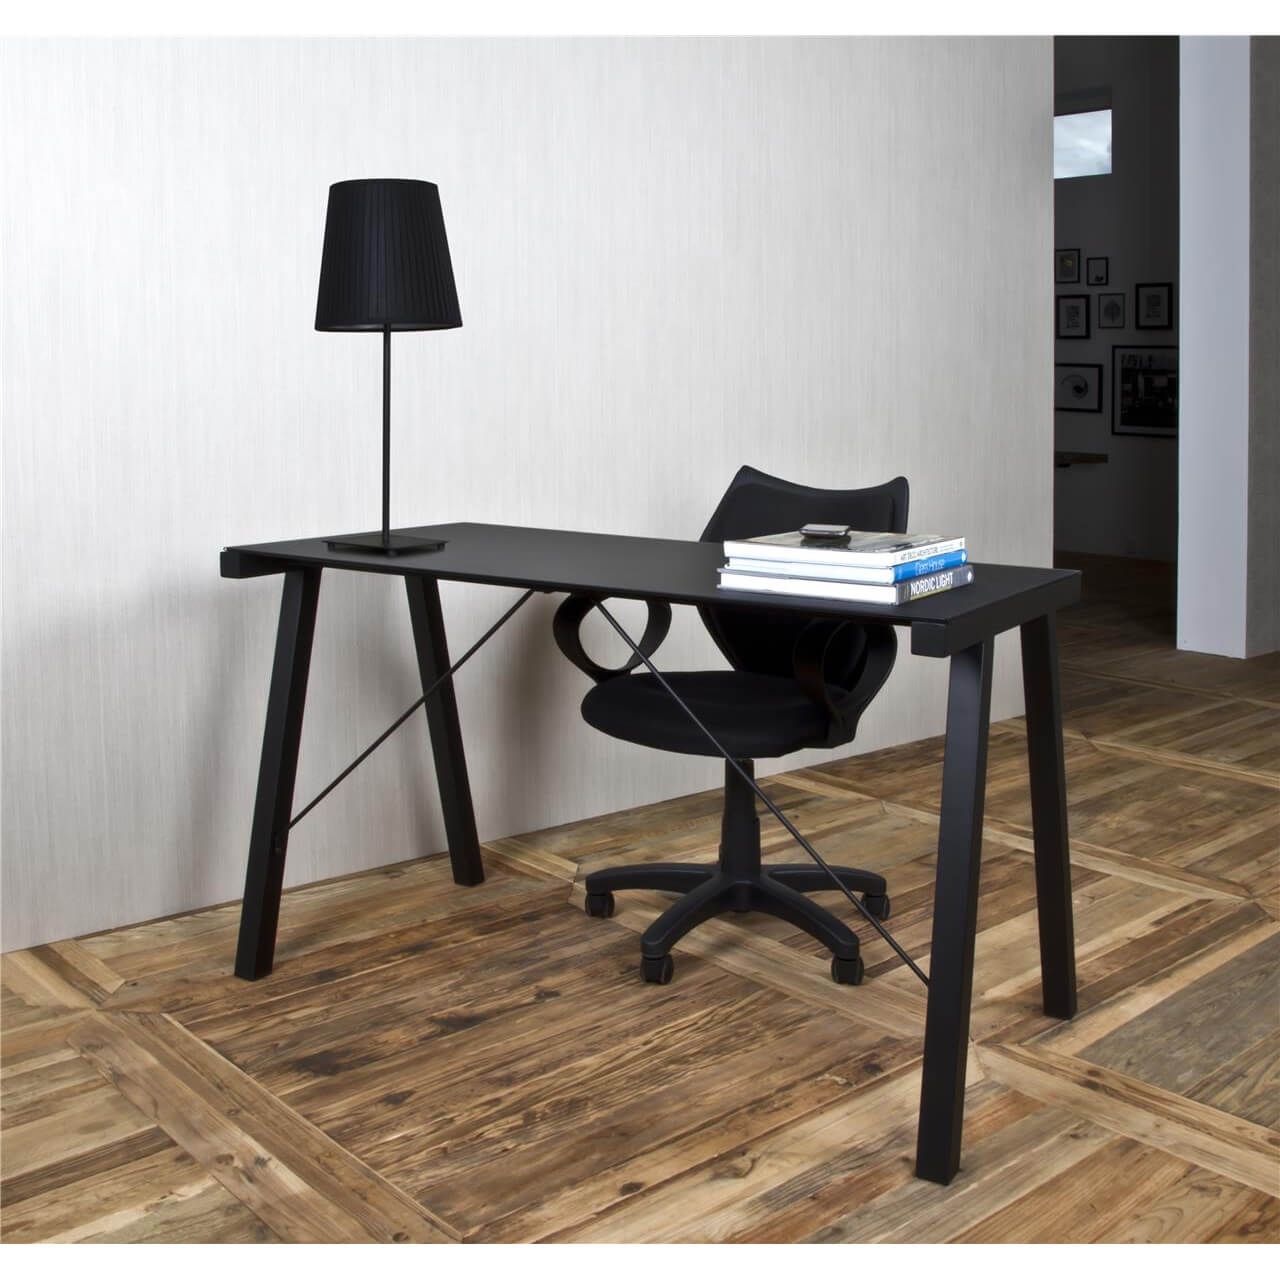 Neptune Black Glass Desk And Metal | Modern Home Office | Fads Within Glass Walnut Wood And Black Metal Office Desks (View 2 of 15)